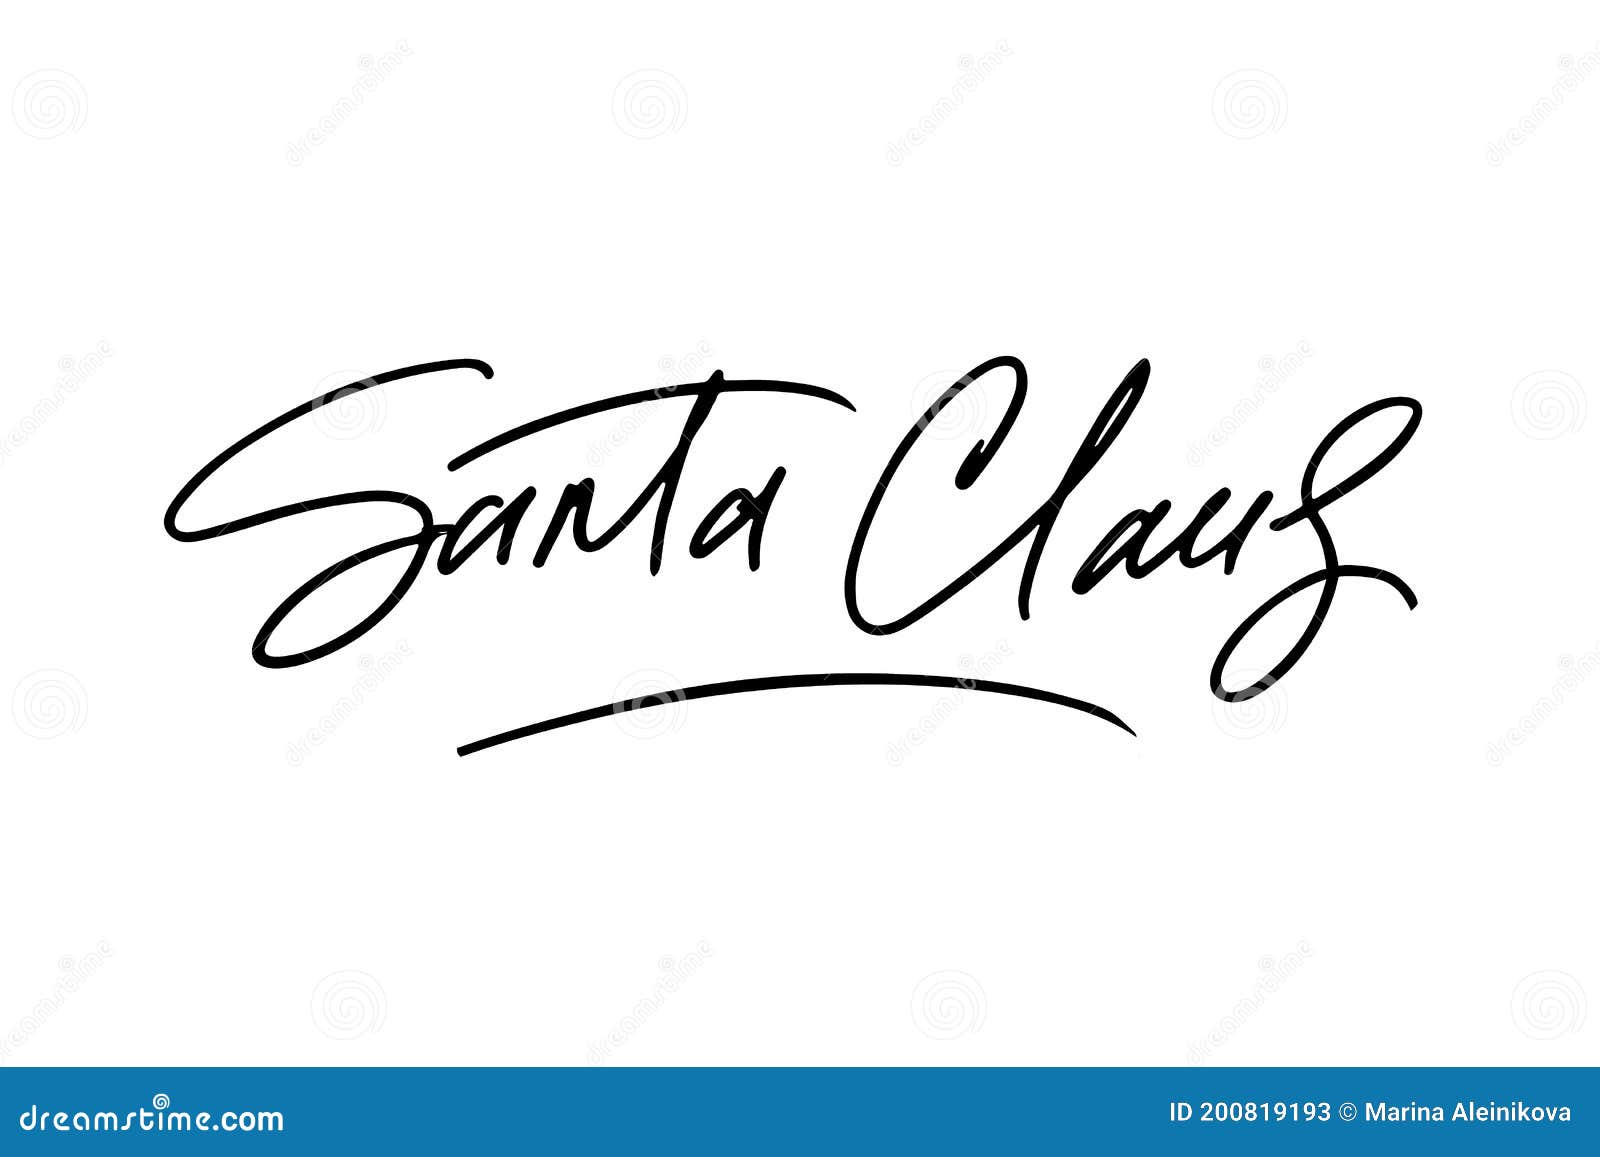 santa-claus-hand-drawn-signature-black-letters-isolated-on-white